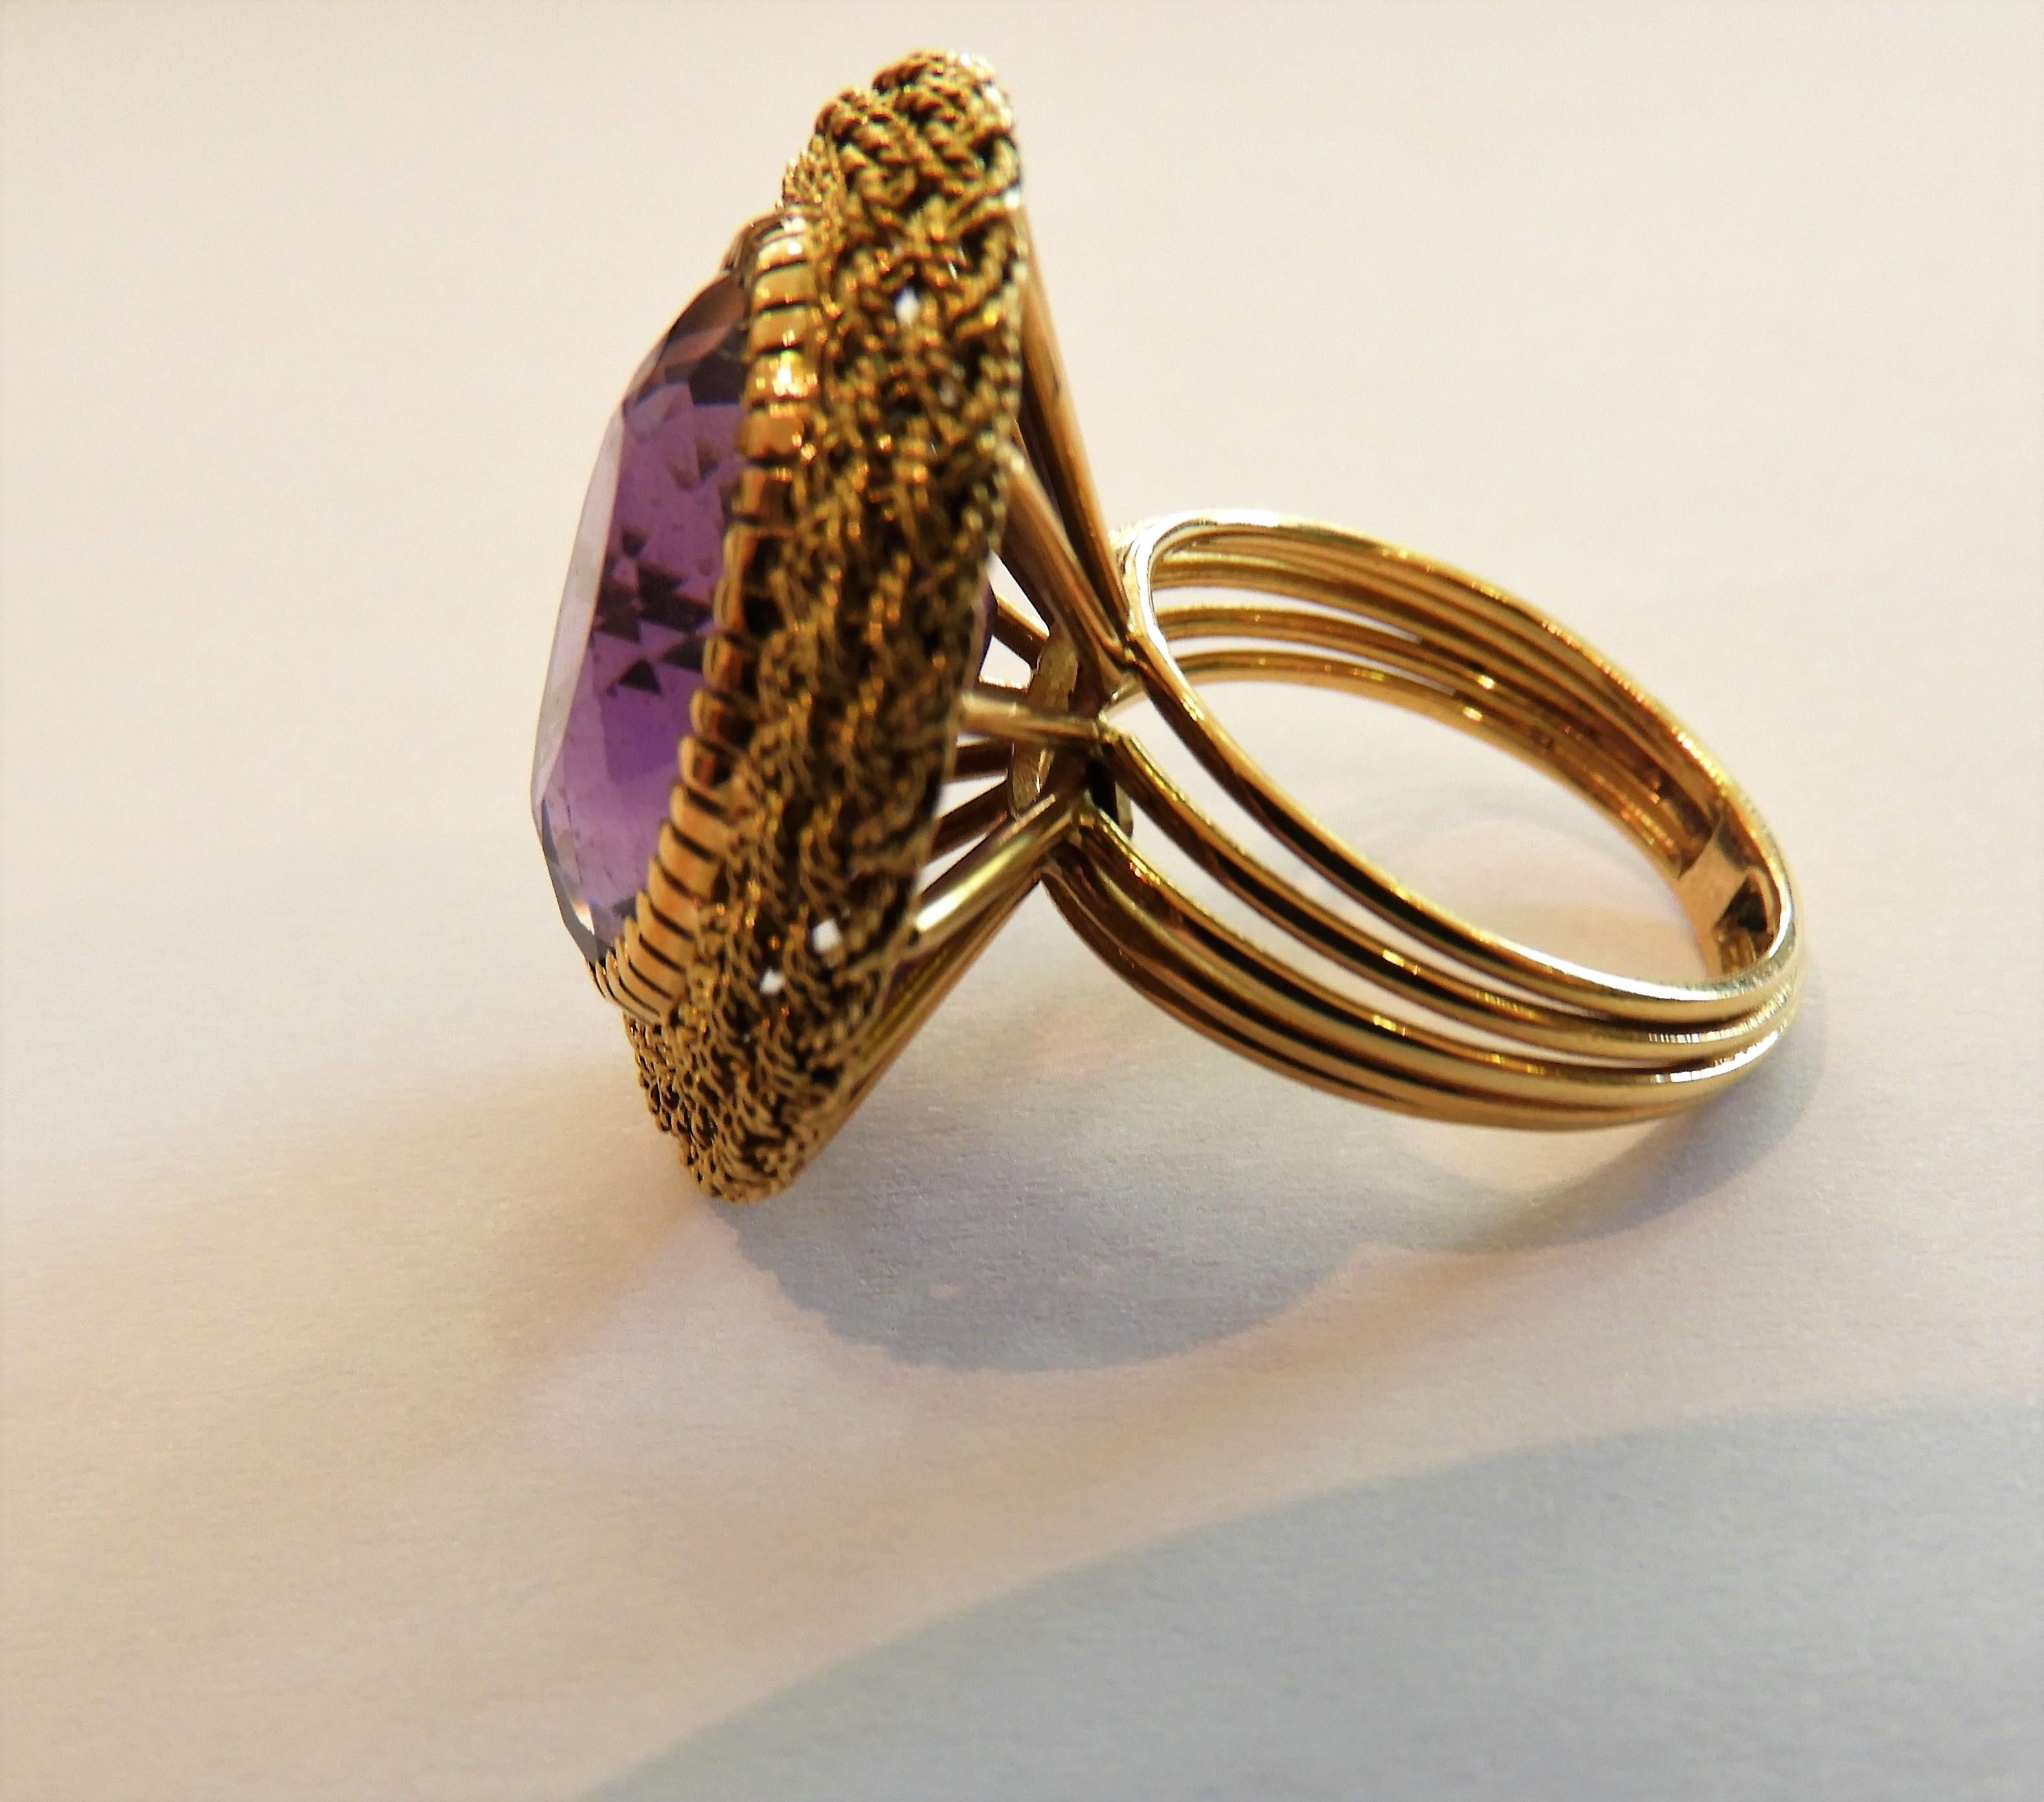 This H. Stern Diamond & Amethyst Cocktail Ring Crafted in solid 18K  Yellow Gold. 
The center is adorned by an oval shape, cabochon cut, prong-set, Amethyst weighing 11,34 carats.
Total weight 14gr and Ring Size around 71/2 Ring can be adapted